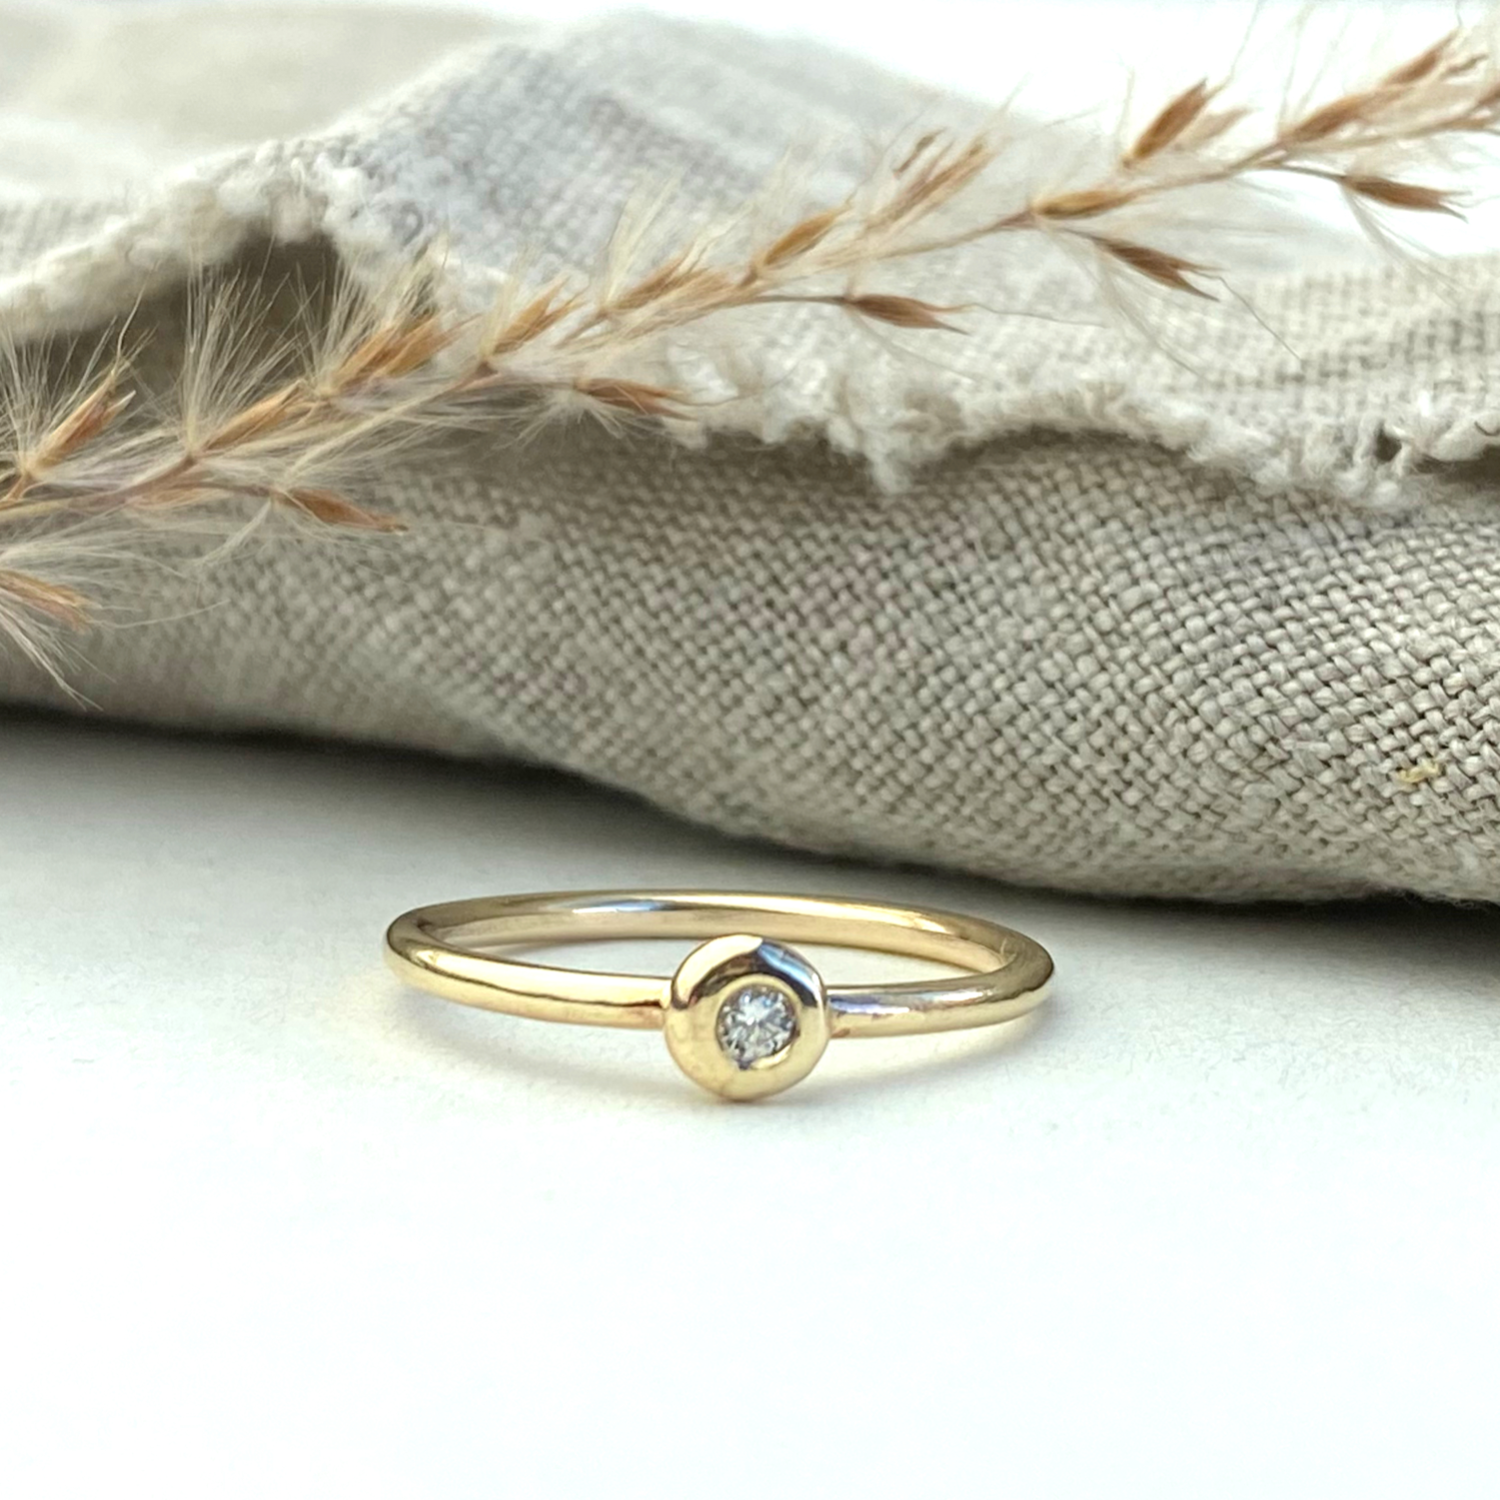 The Sovereign 9ct Gold and Diamond Ring - yellow gold skinny stacking ring